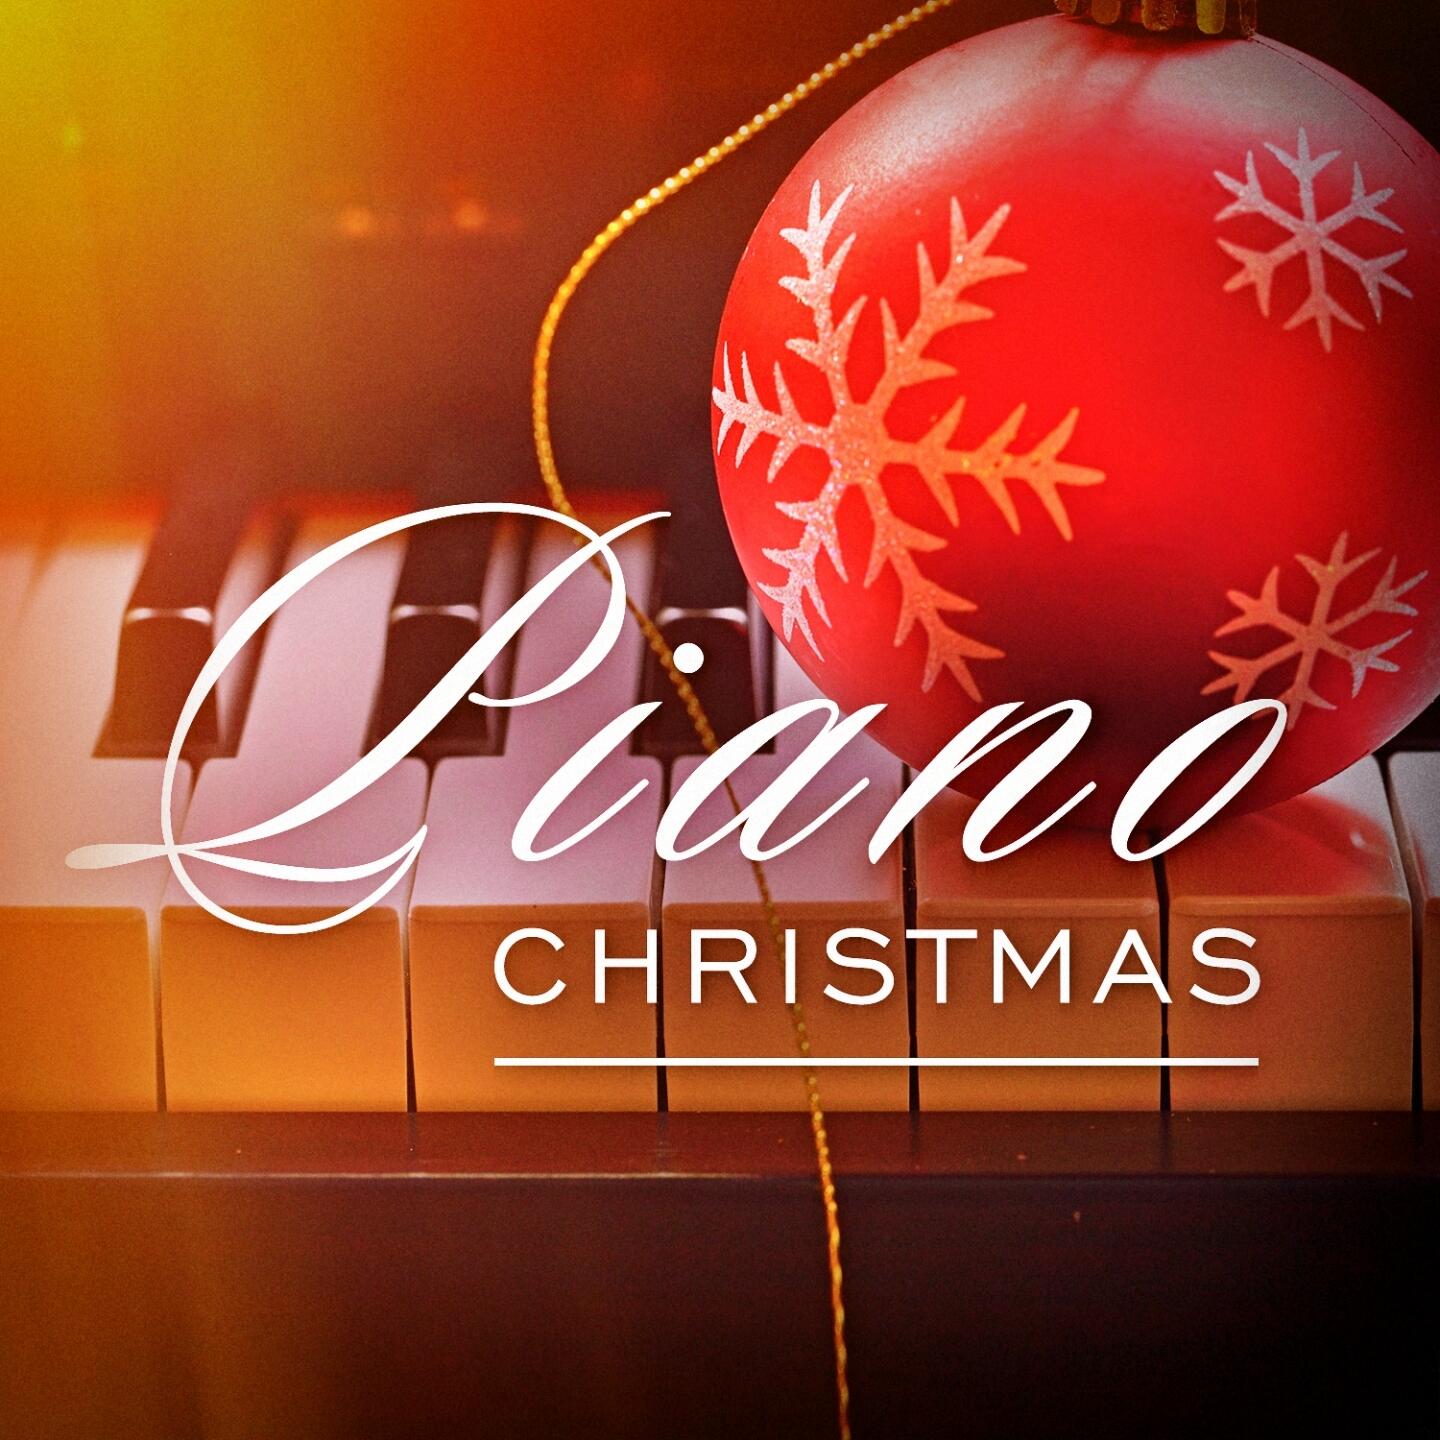 piano-piano-christmas-the-most-famous-xmas-songs-and-carols-played